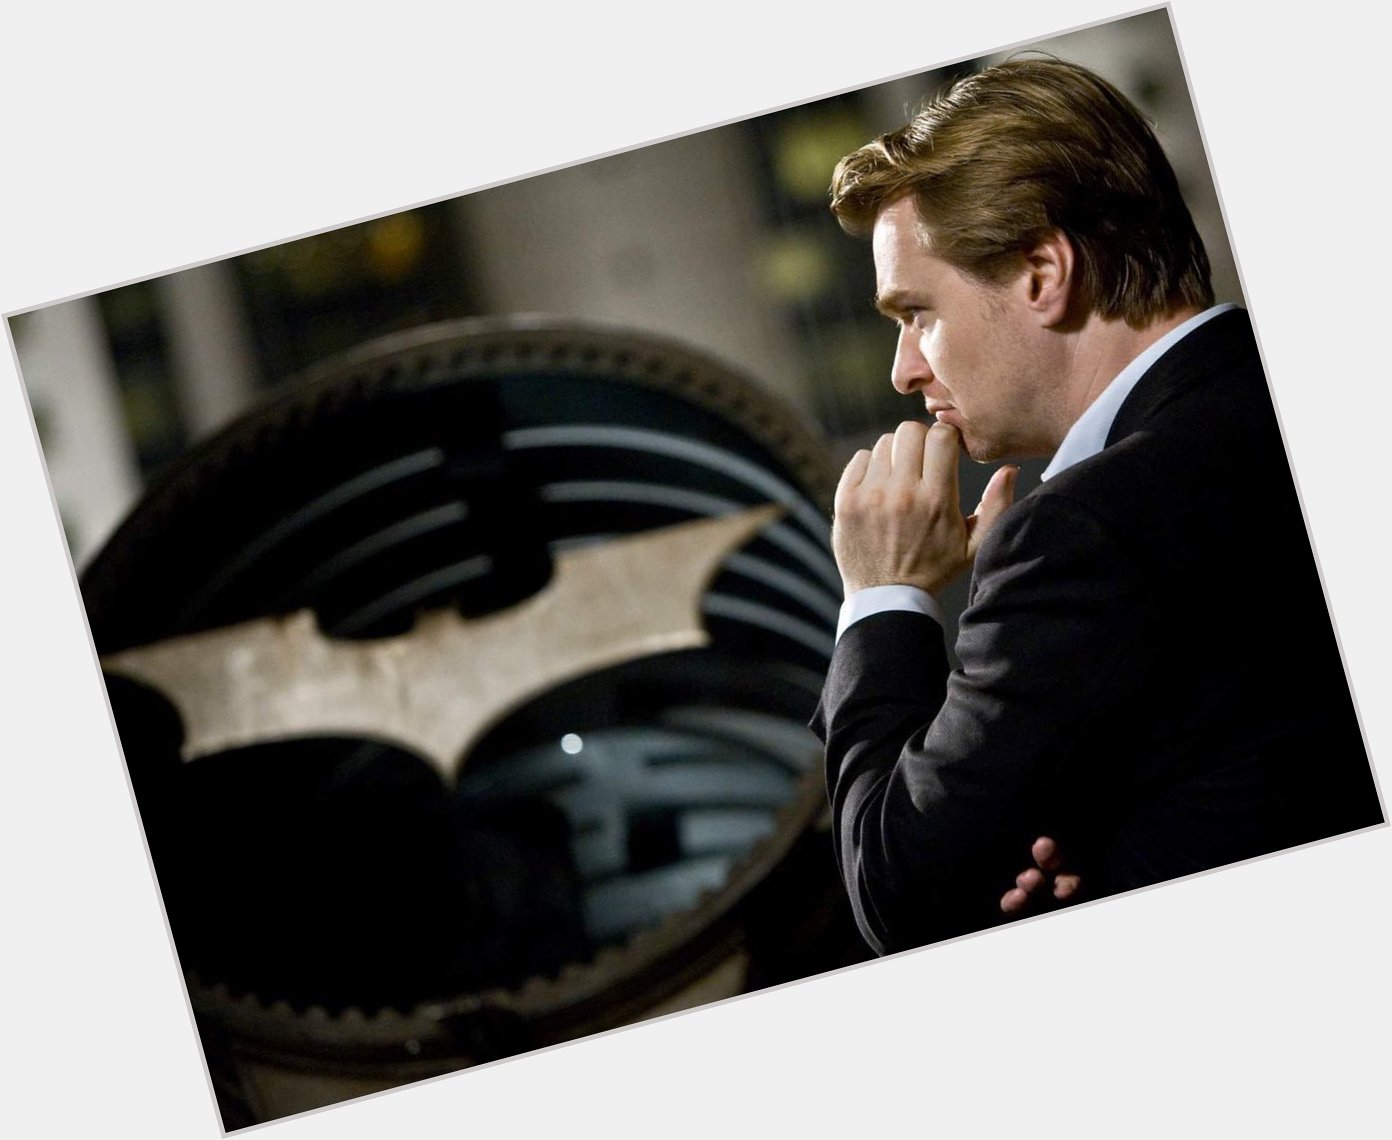 Happy Birthday again to two of the most innovative directors working today, Christopher Nolan and Richard Linklater! 